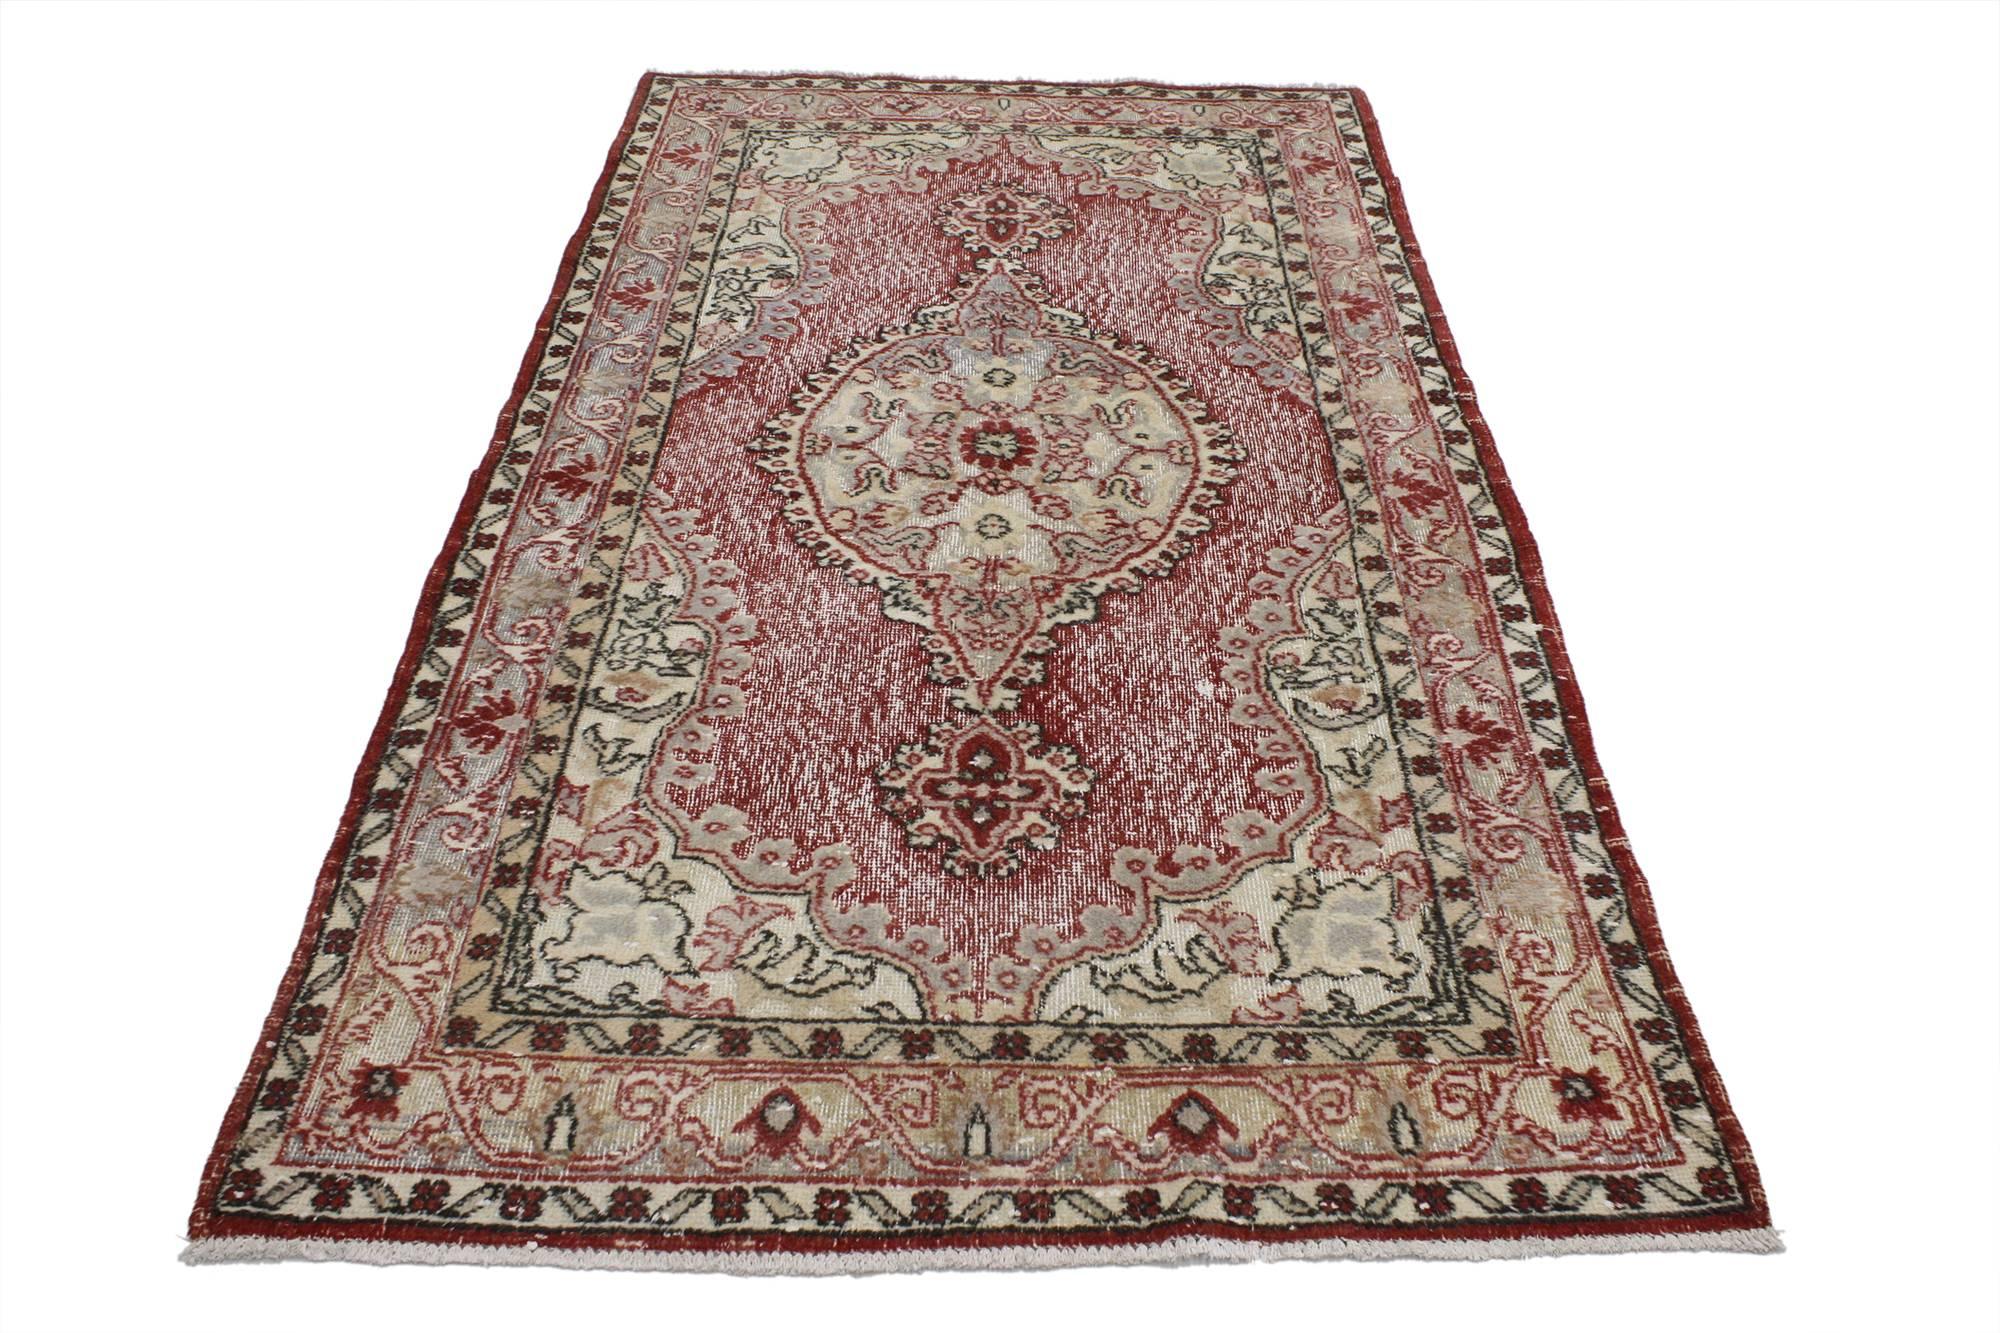 51941, French country style distressed vintage Turkish Sivas rug, Accent rug. Dashing and darling this distressed vintage Sivas rug embodies the beauty of French Country style and Turkish weaving. A round medallion with pendants at opposite ends